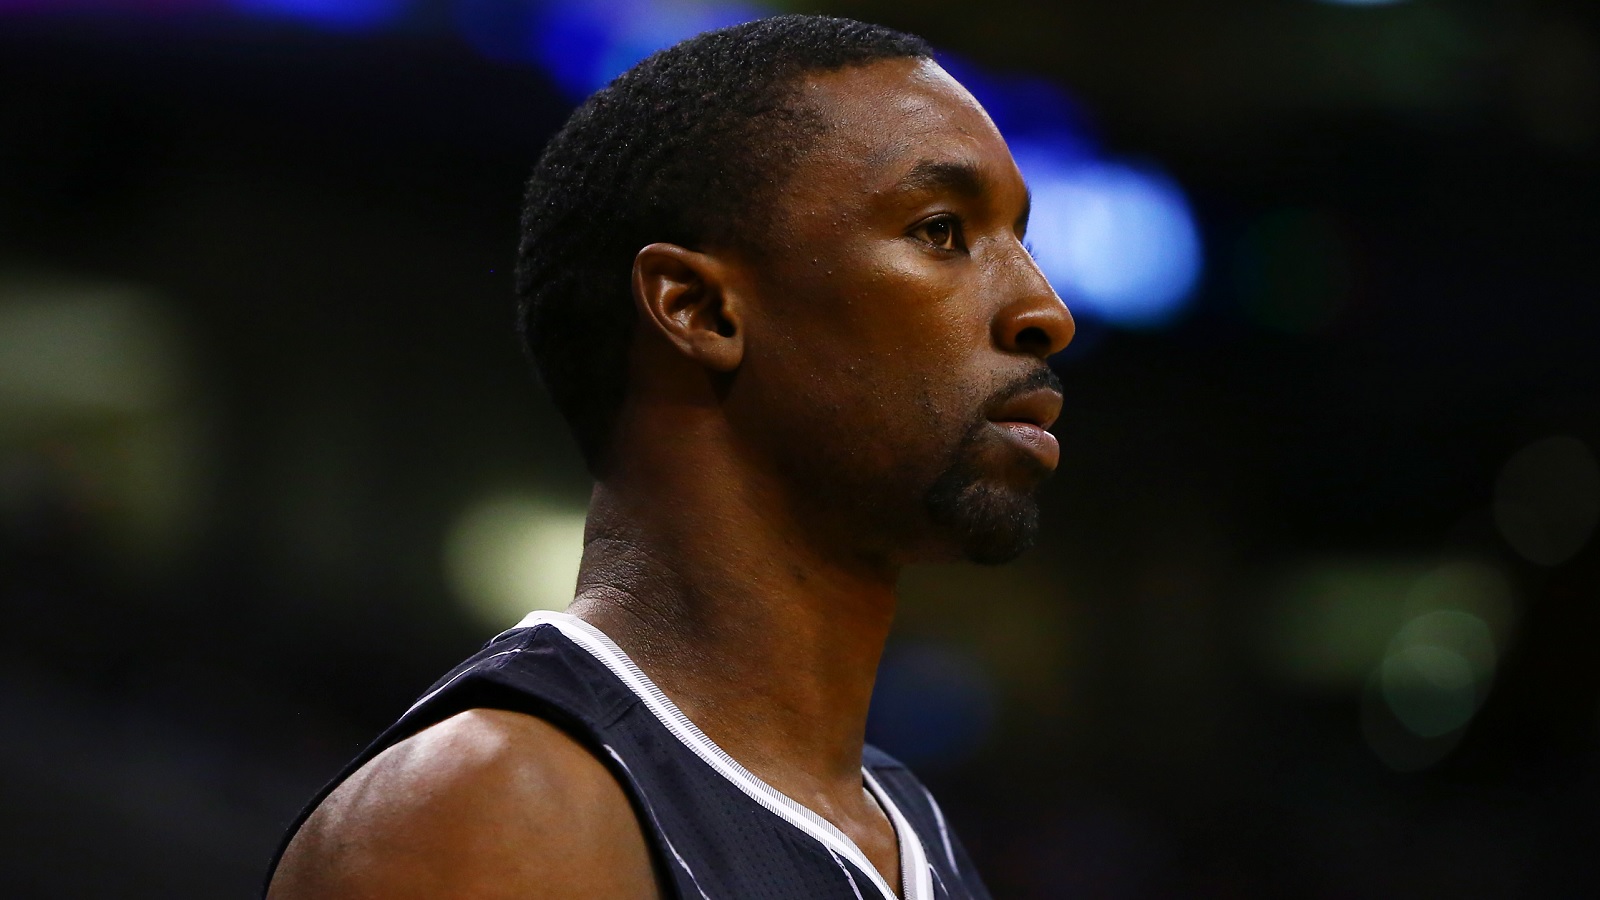 Ex-NBA star Ben Gordon had order of protection before son punch bust:  sources